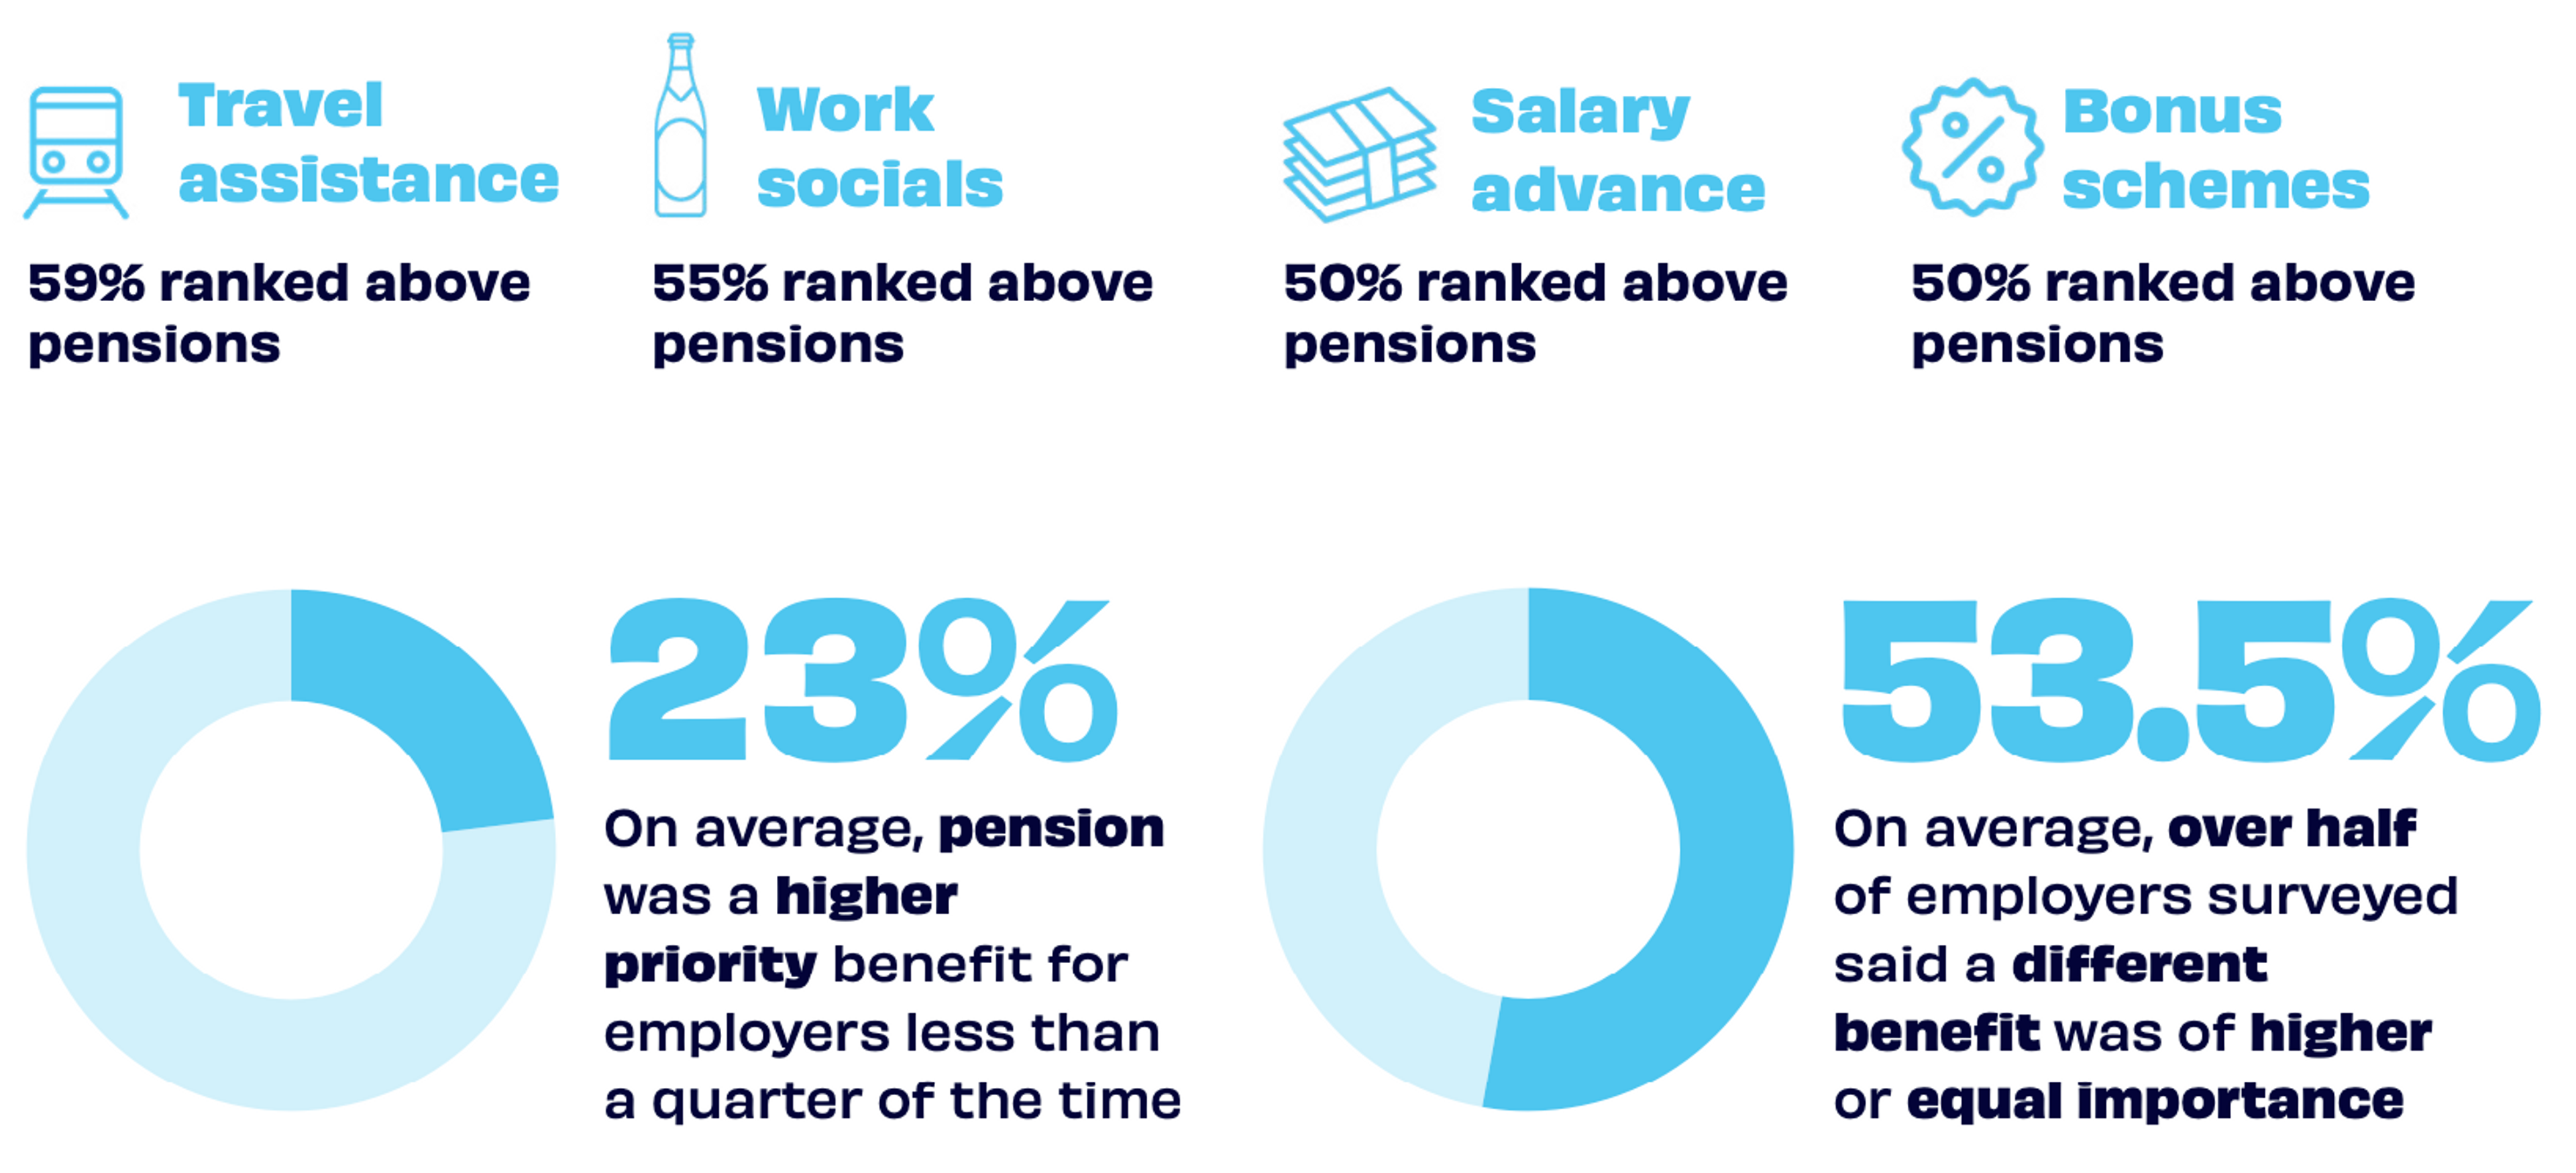 A graphic showing employer benefits ranking higher in importance than pensions